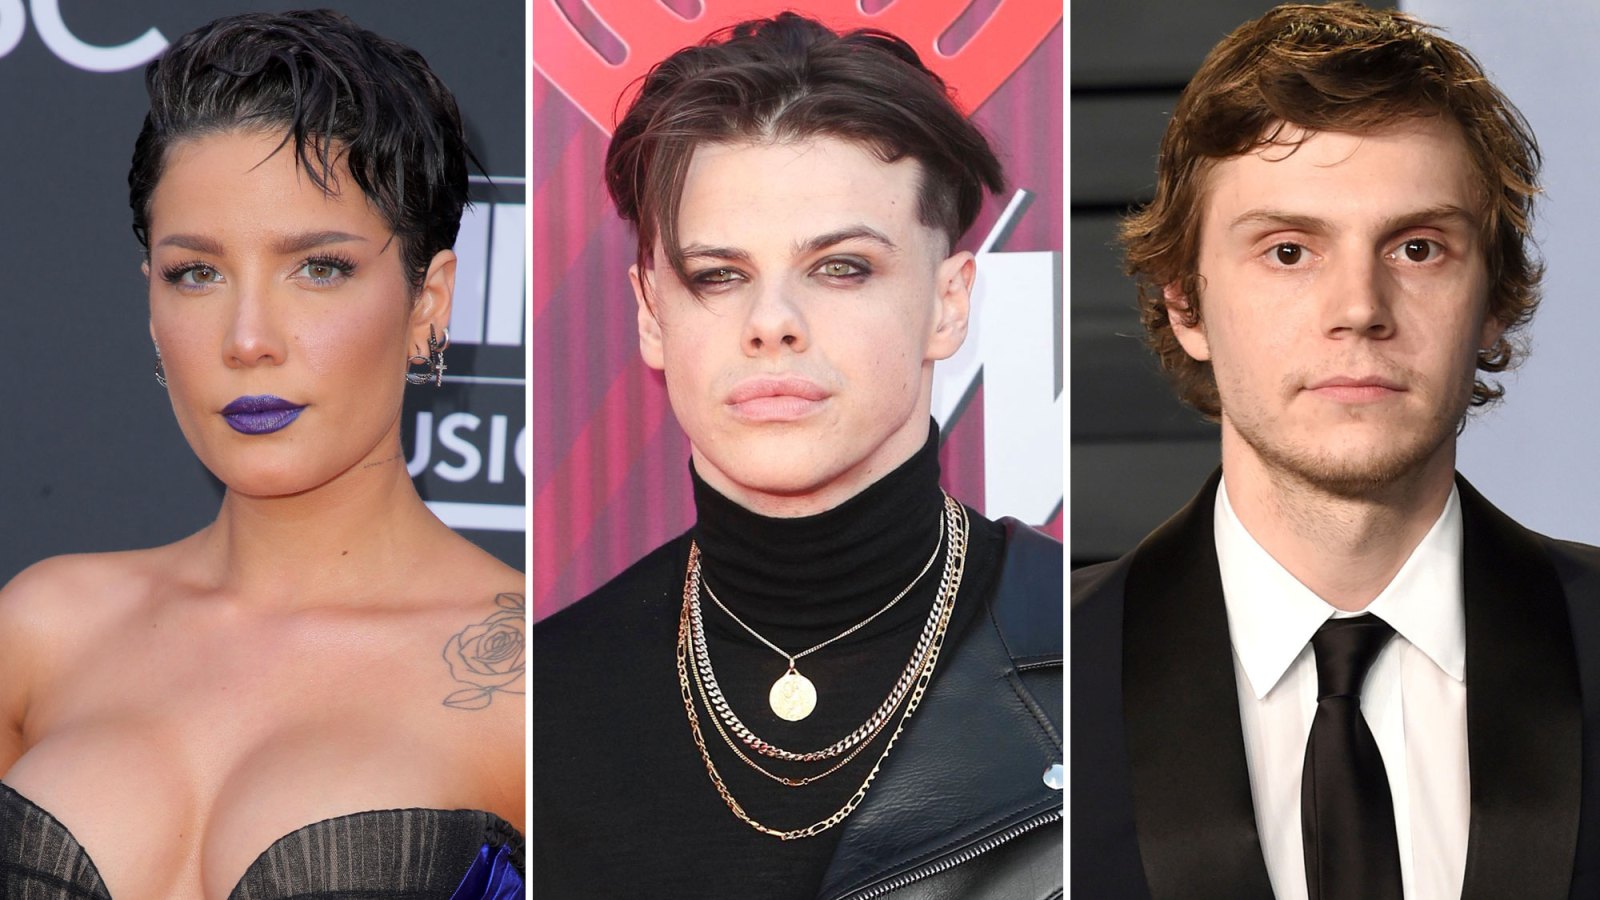 Halsey Breaks Her Silence on Yungblud Split After Going Public With Evan Peters Romance